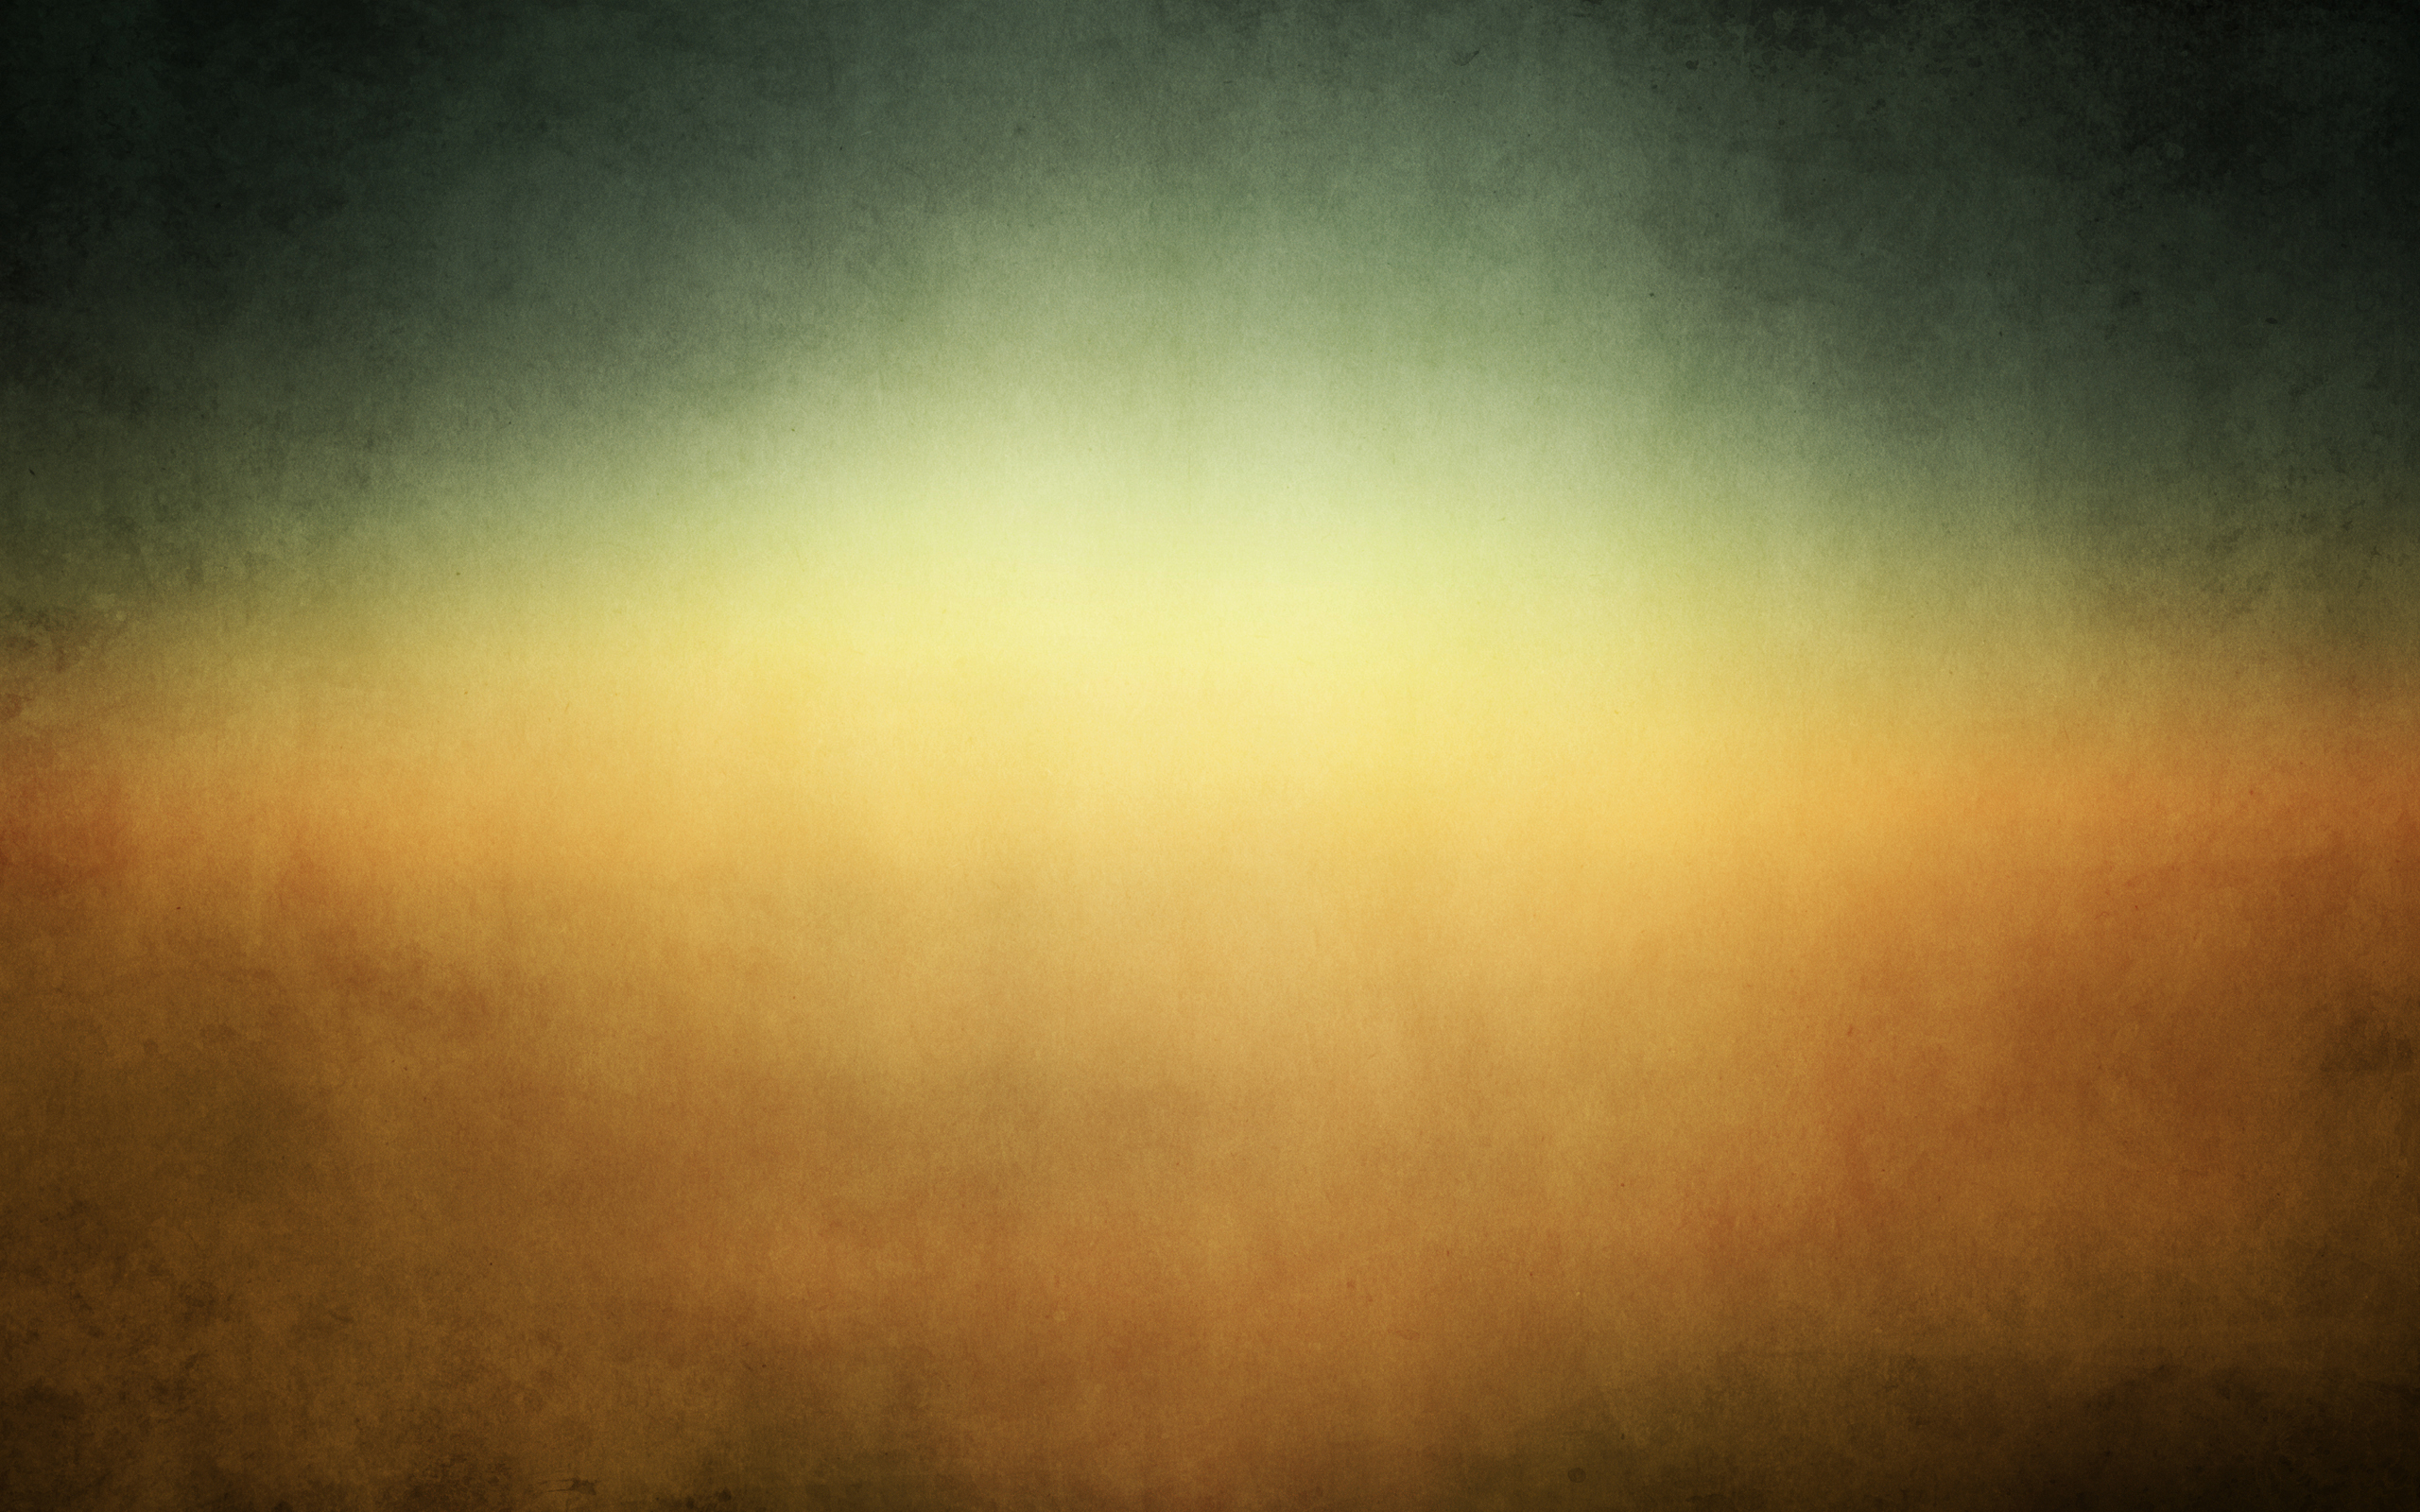 Abstract Brown 2560x1600